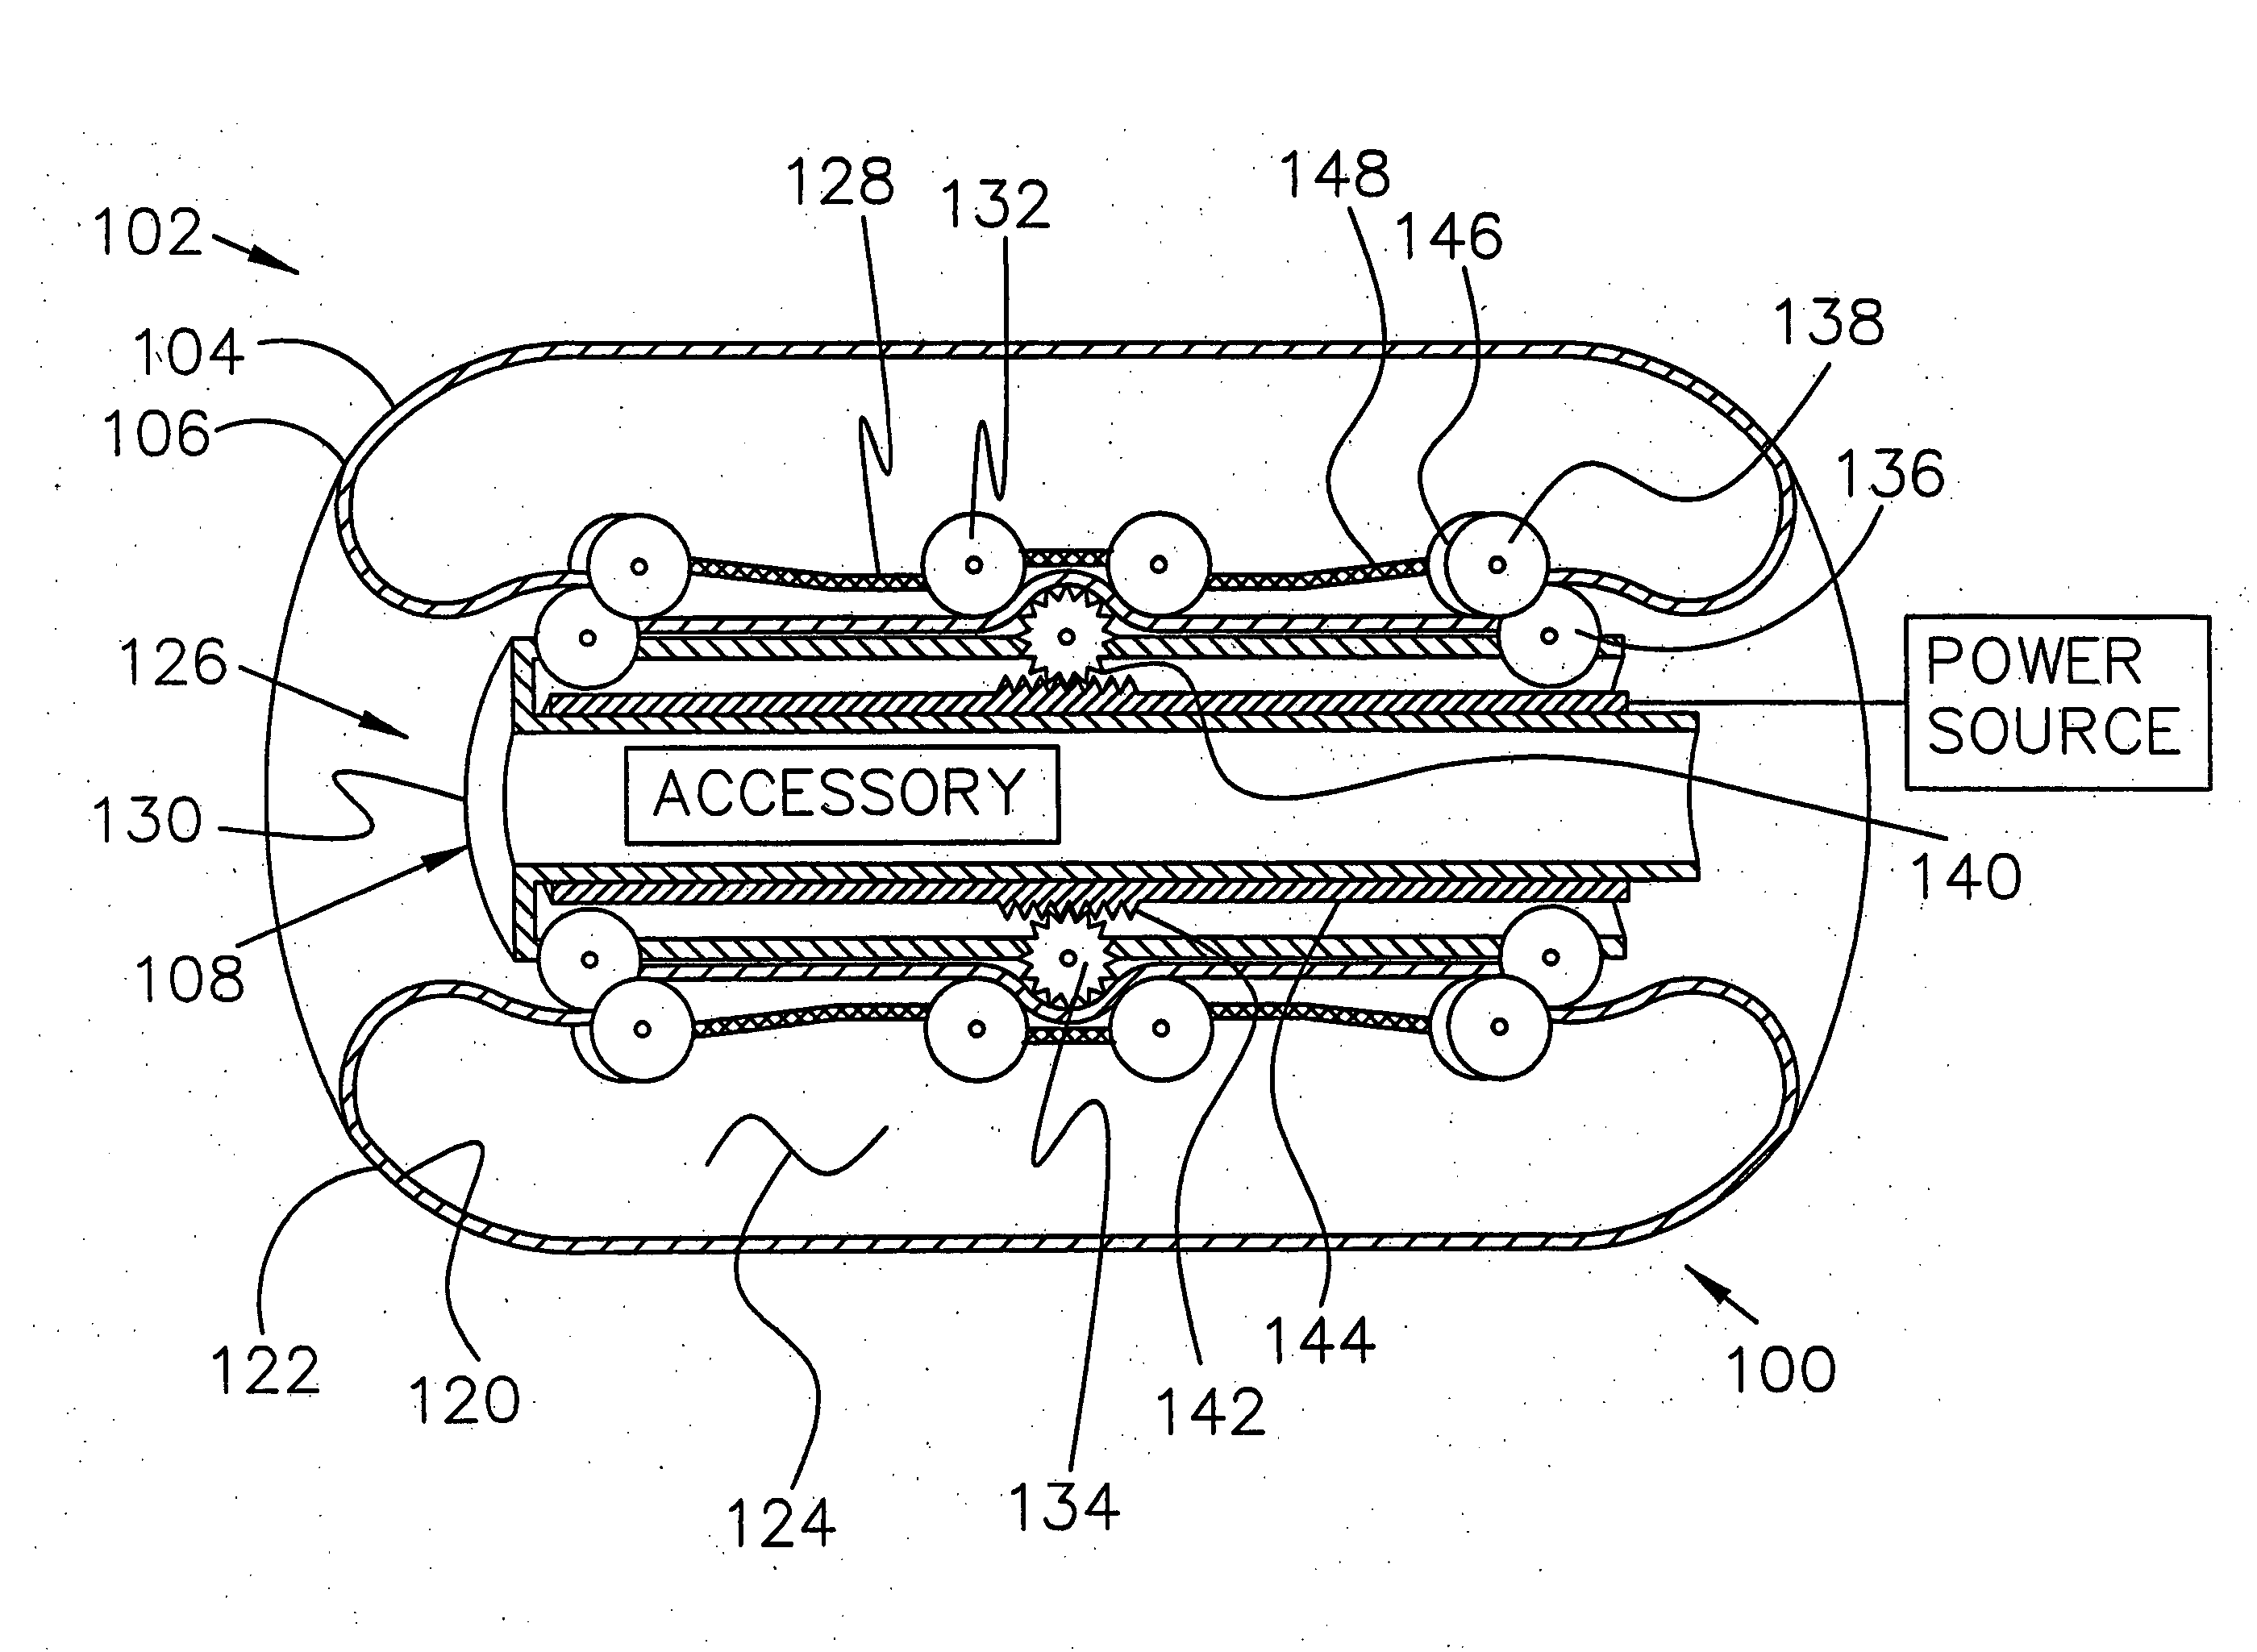 Self-propellable endoscopic apparatus and method